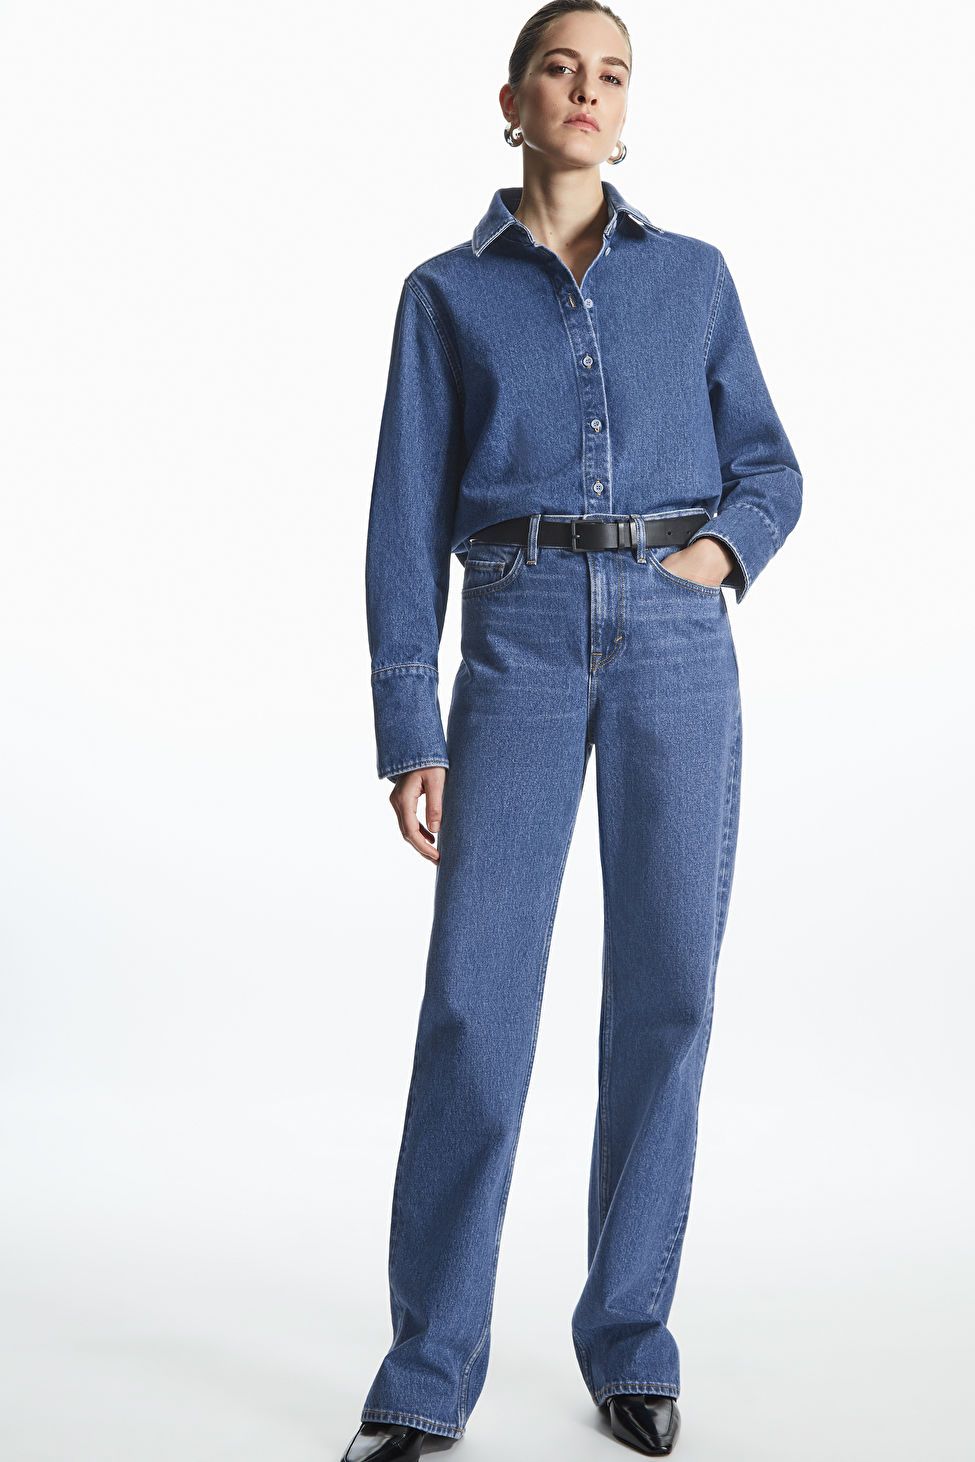 STRAIGHT-LEG LOOSE-FIT EXTRA-LONG JEANS | COS UK